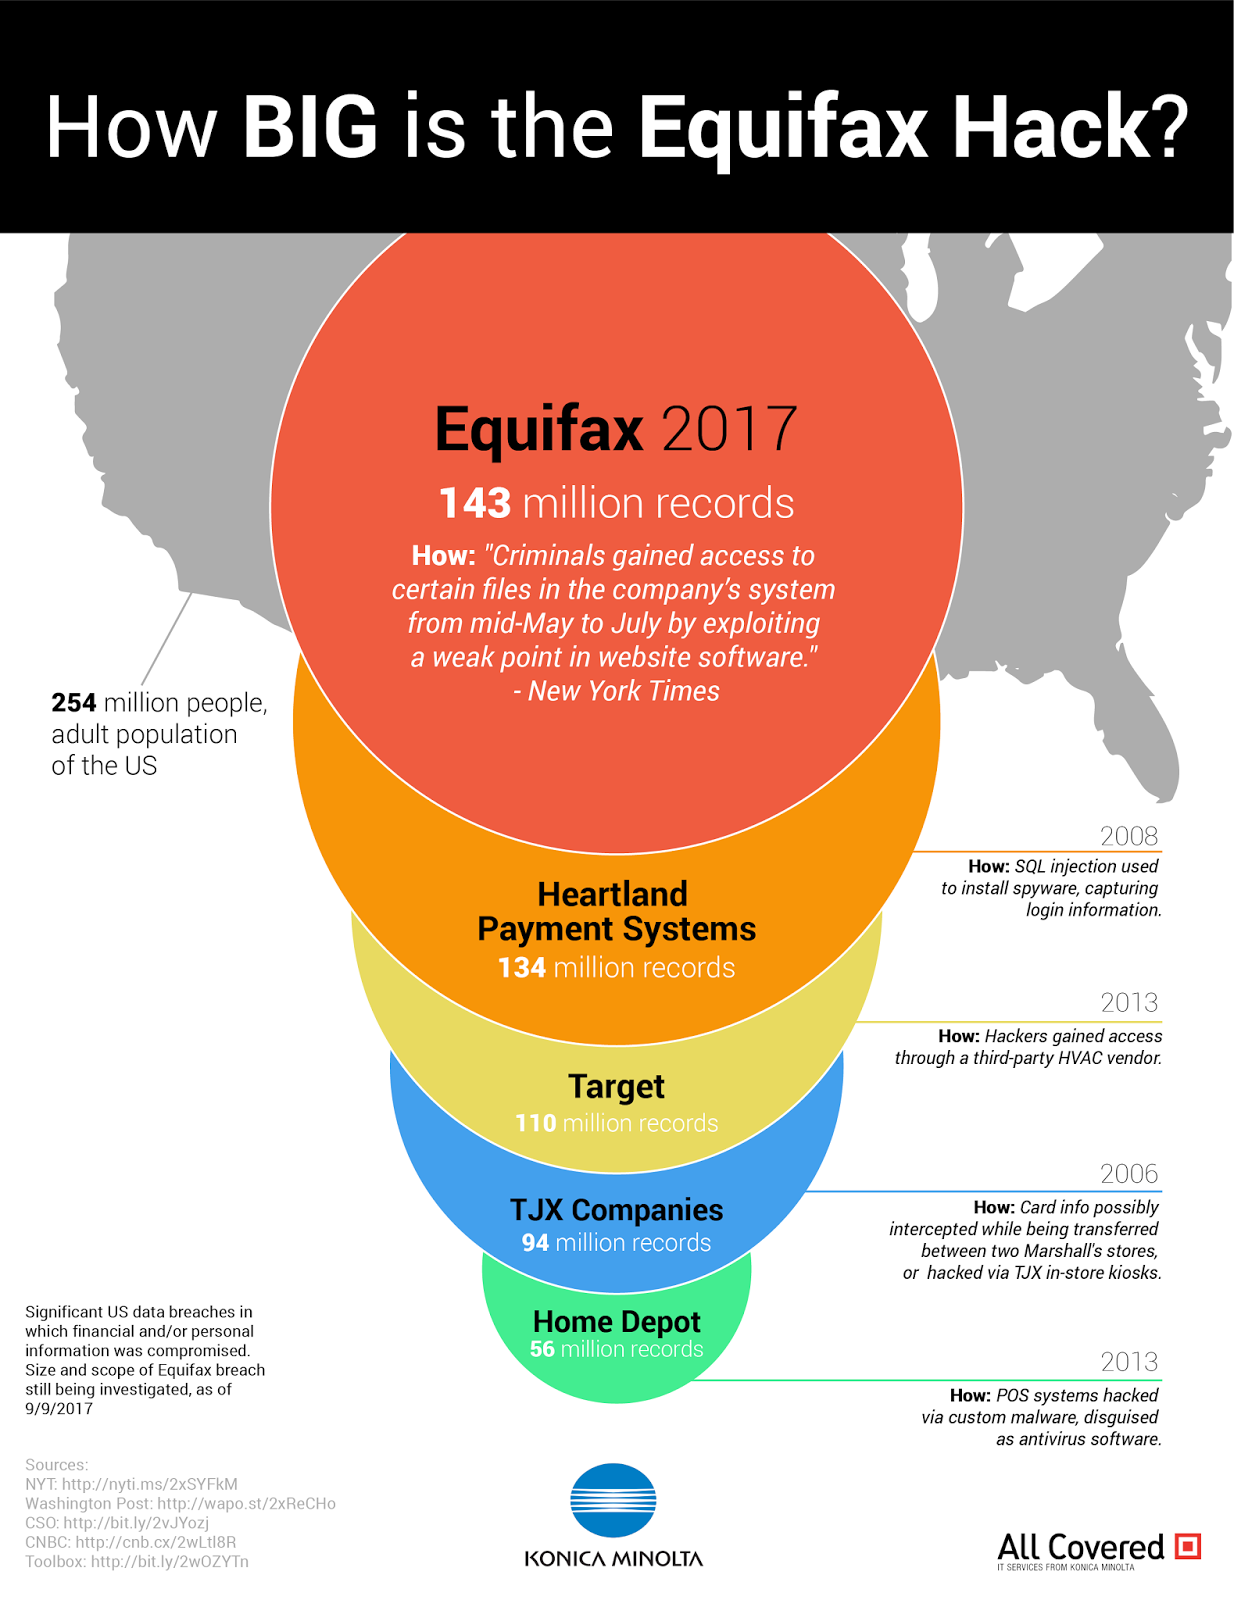 a case study analysis of the equifax data breach